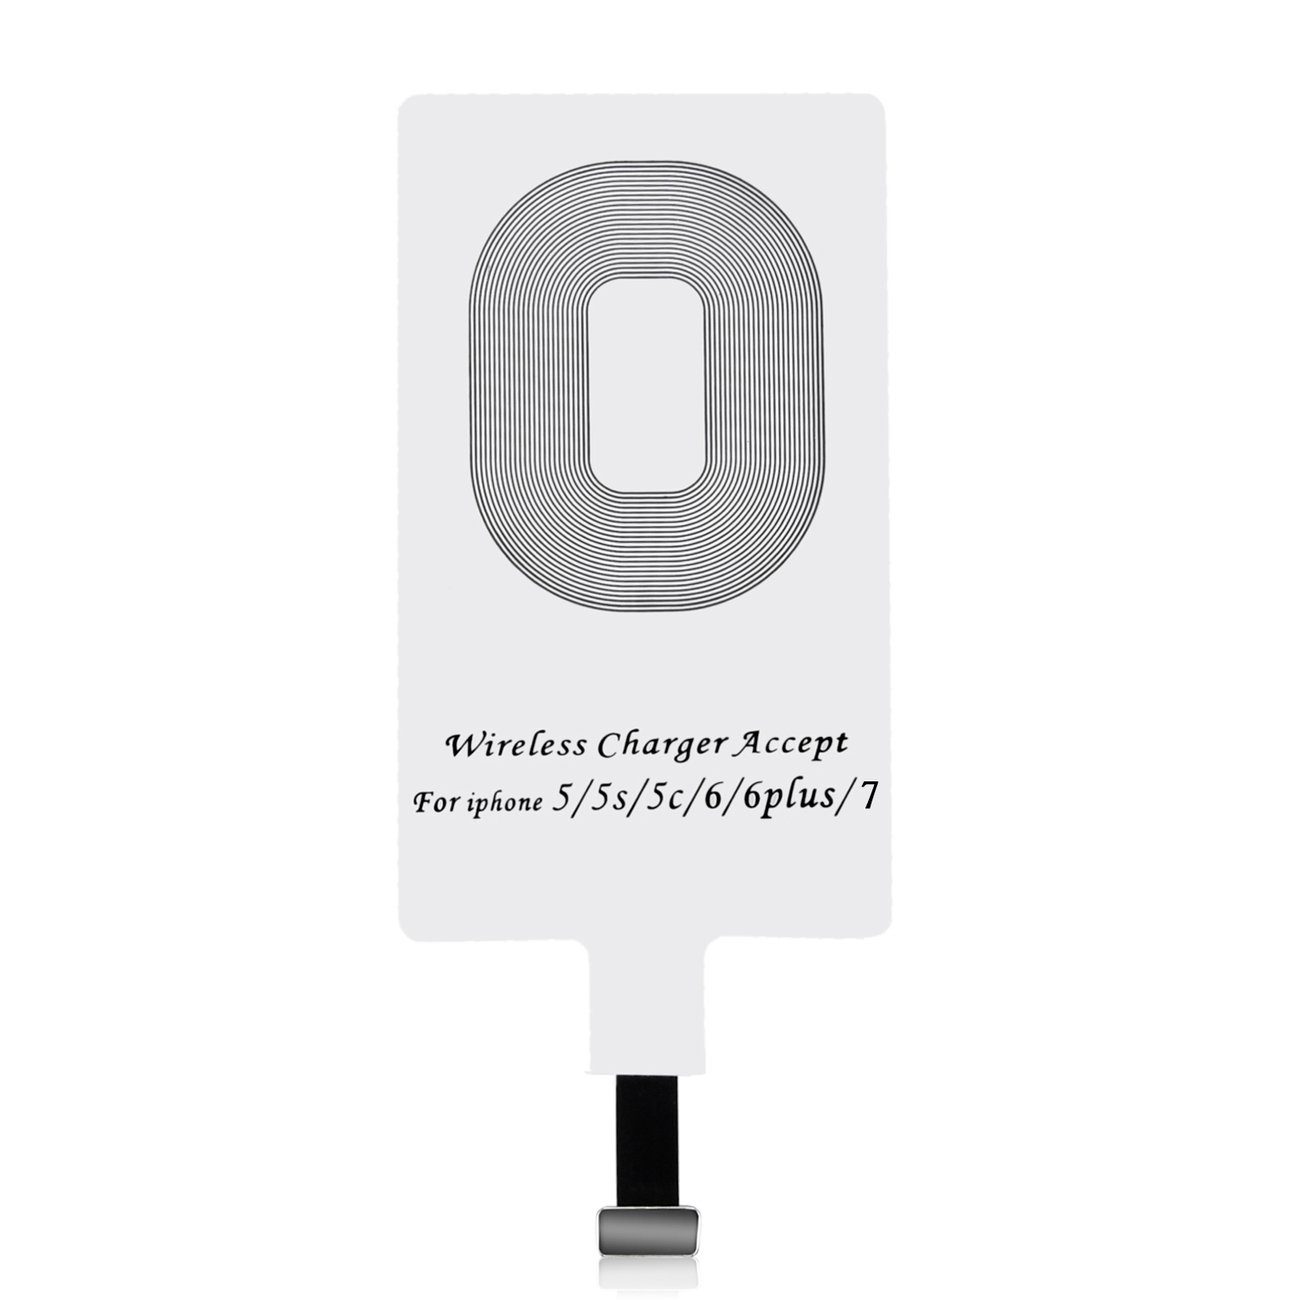 Choetech Microfaser Qi Wireless Charger Ladeadapter Qi Empfänger iPhone Wireless Charger